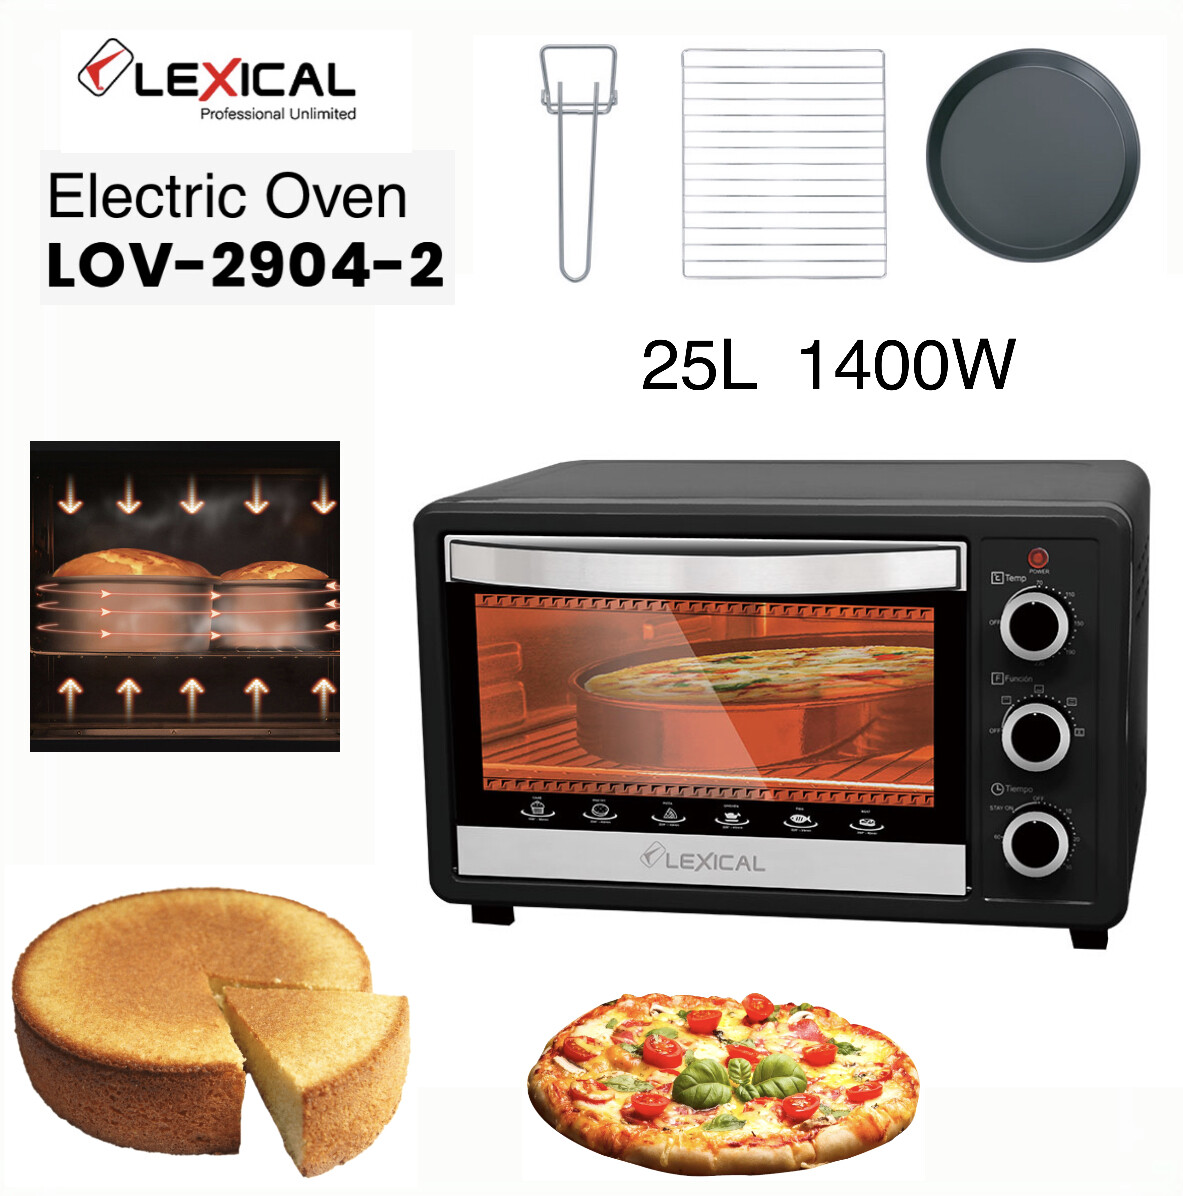 LEXICAL Oven 25L